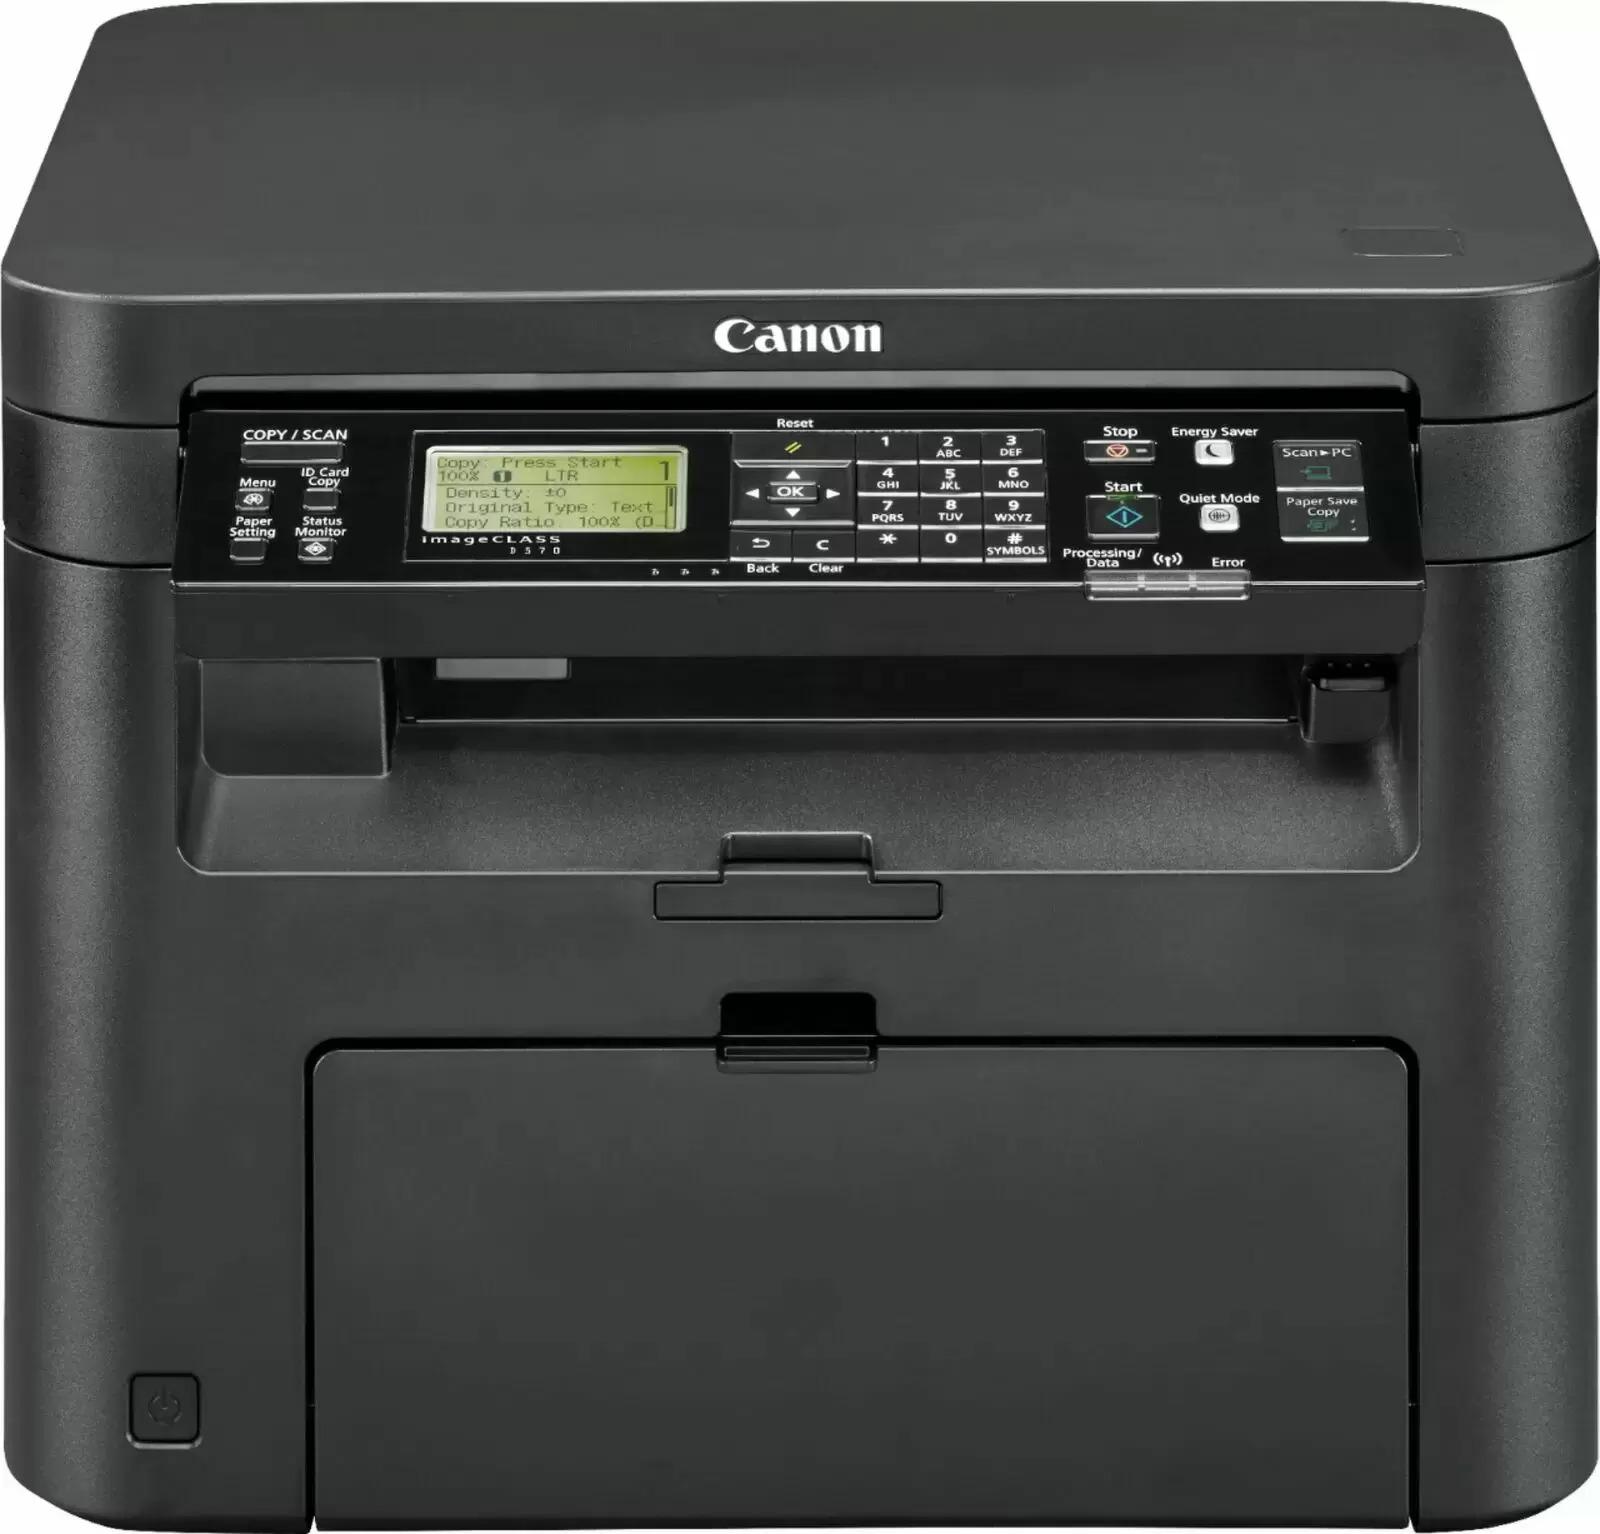 Canon imageCLASS D570 Wireless Black-and-White Laser Printer for $99.99 Shipped